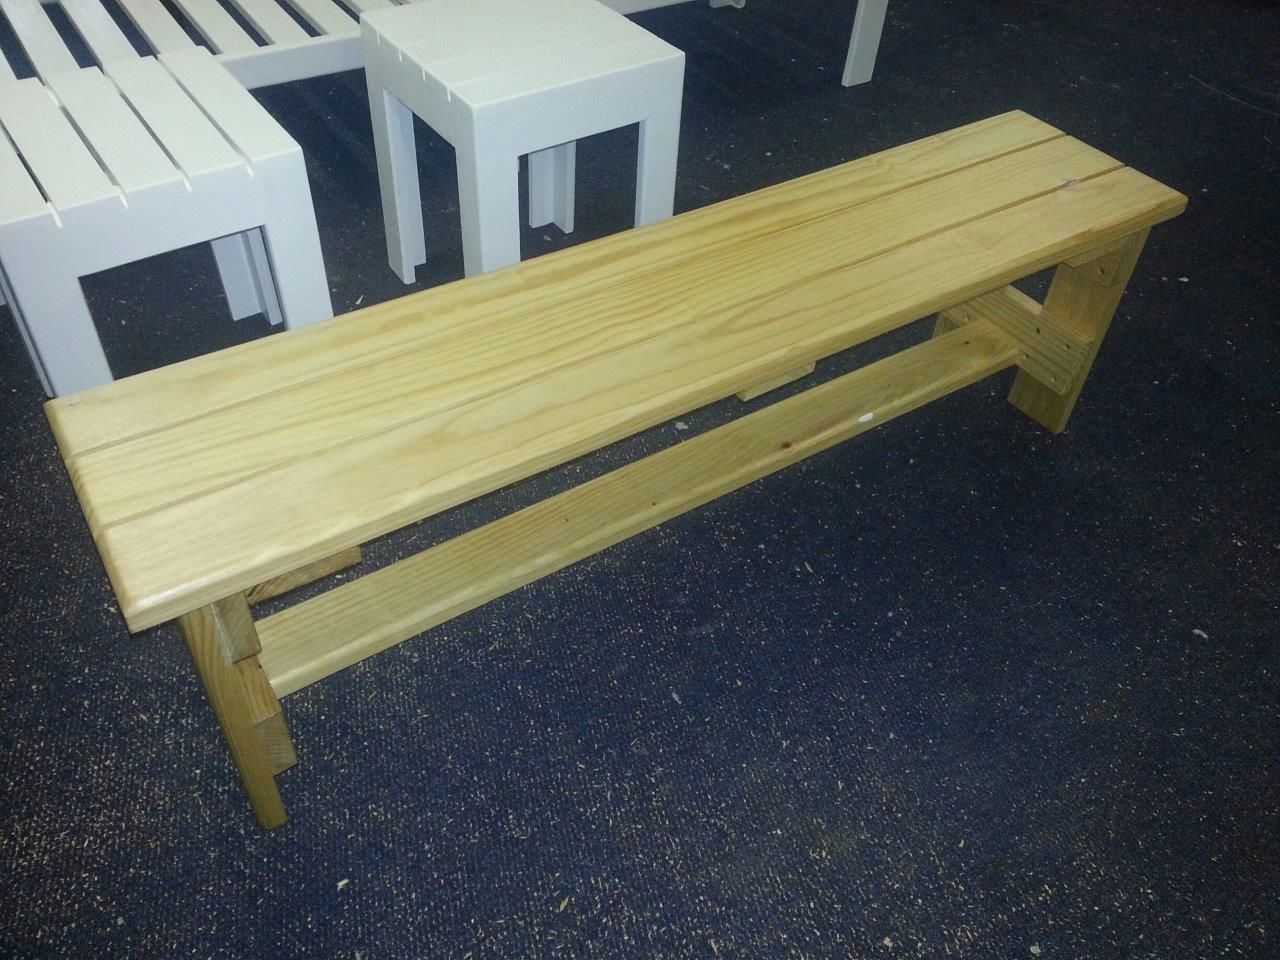 THE "WEDDING" LOOSE BENCH